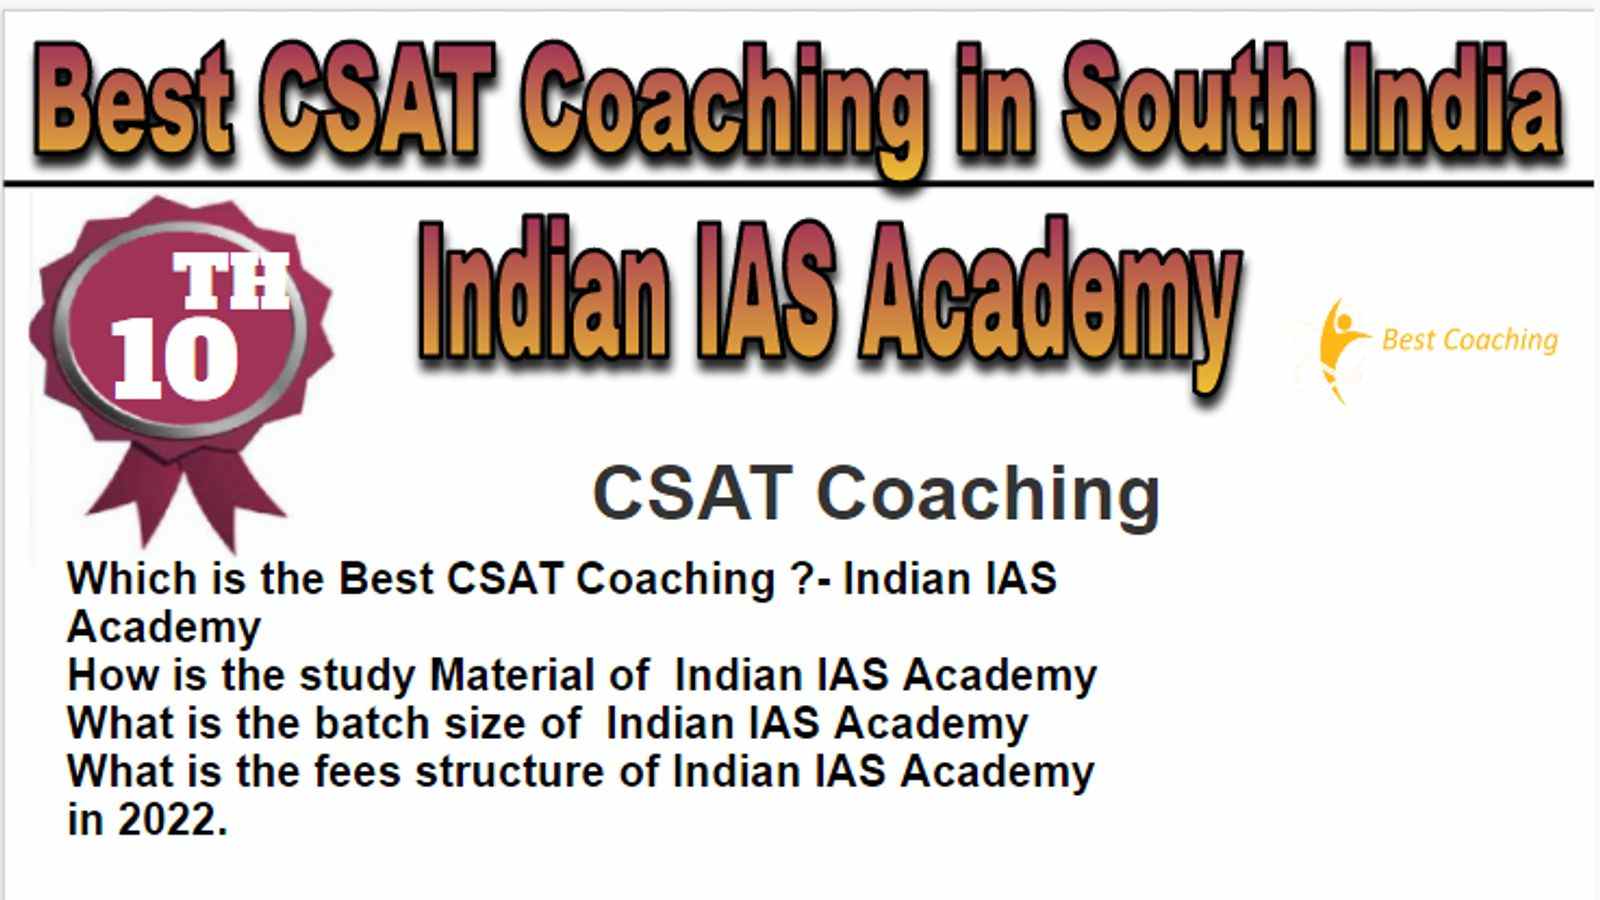 Rank 10 Best CSAT Coaching in South India